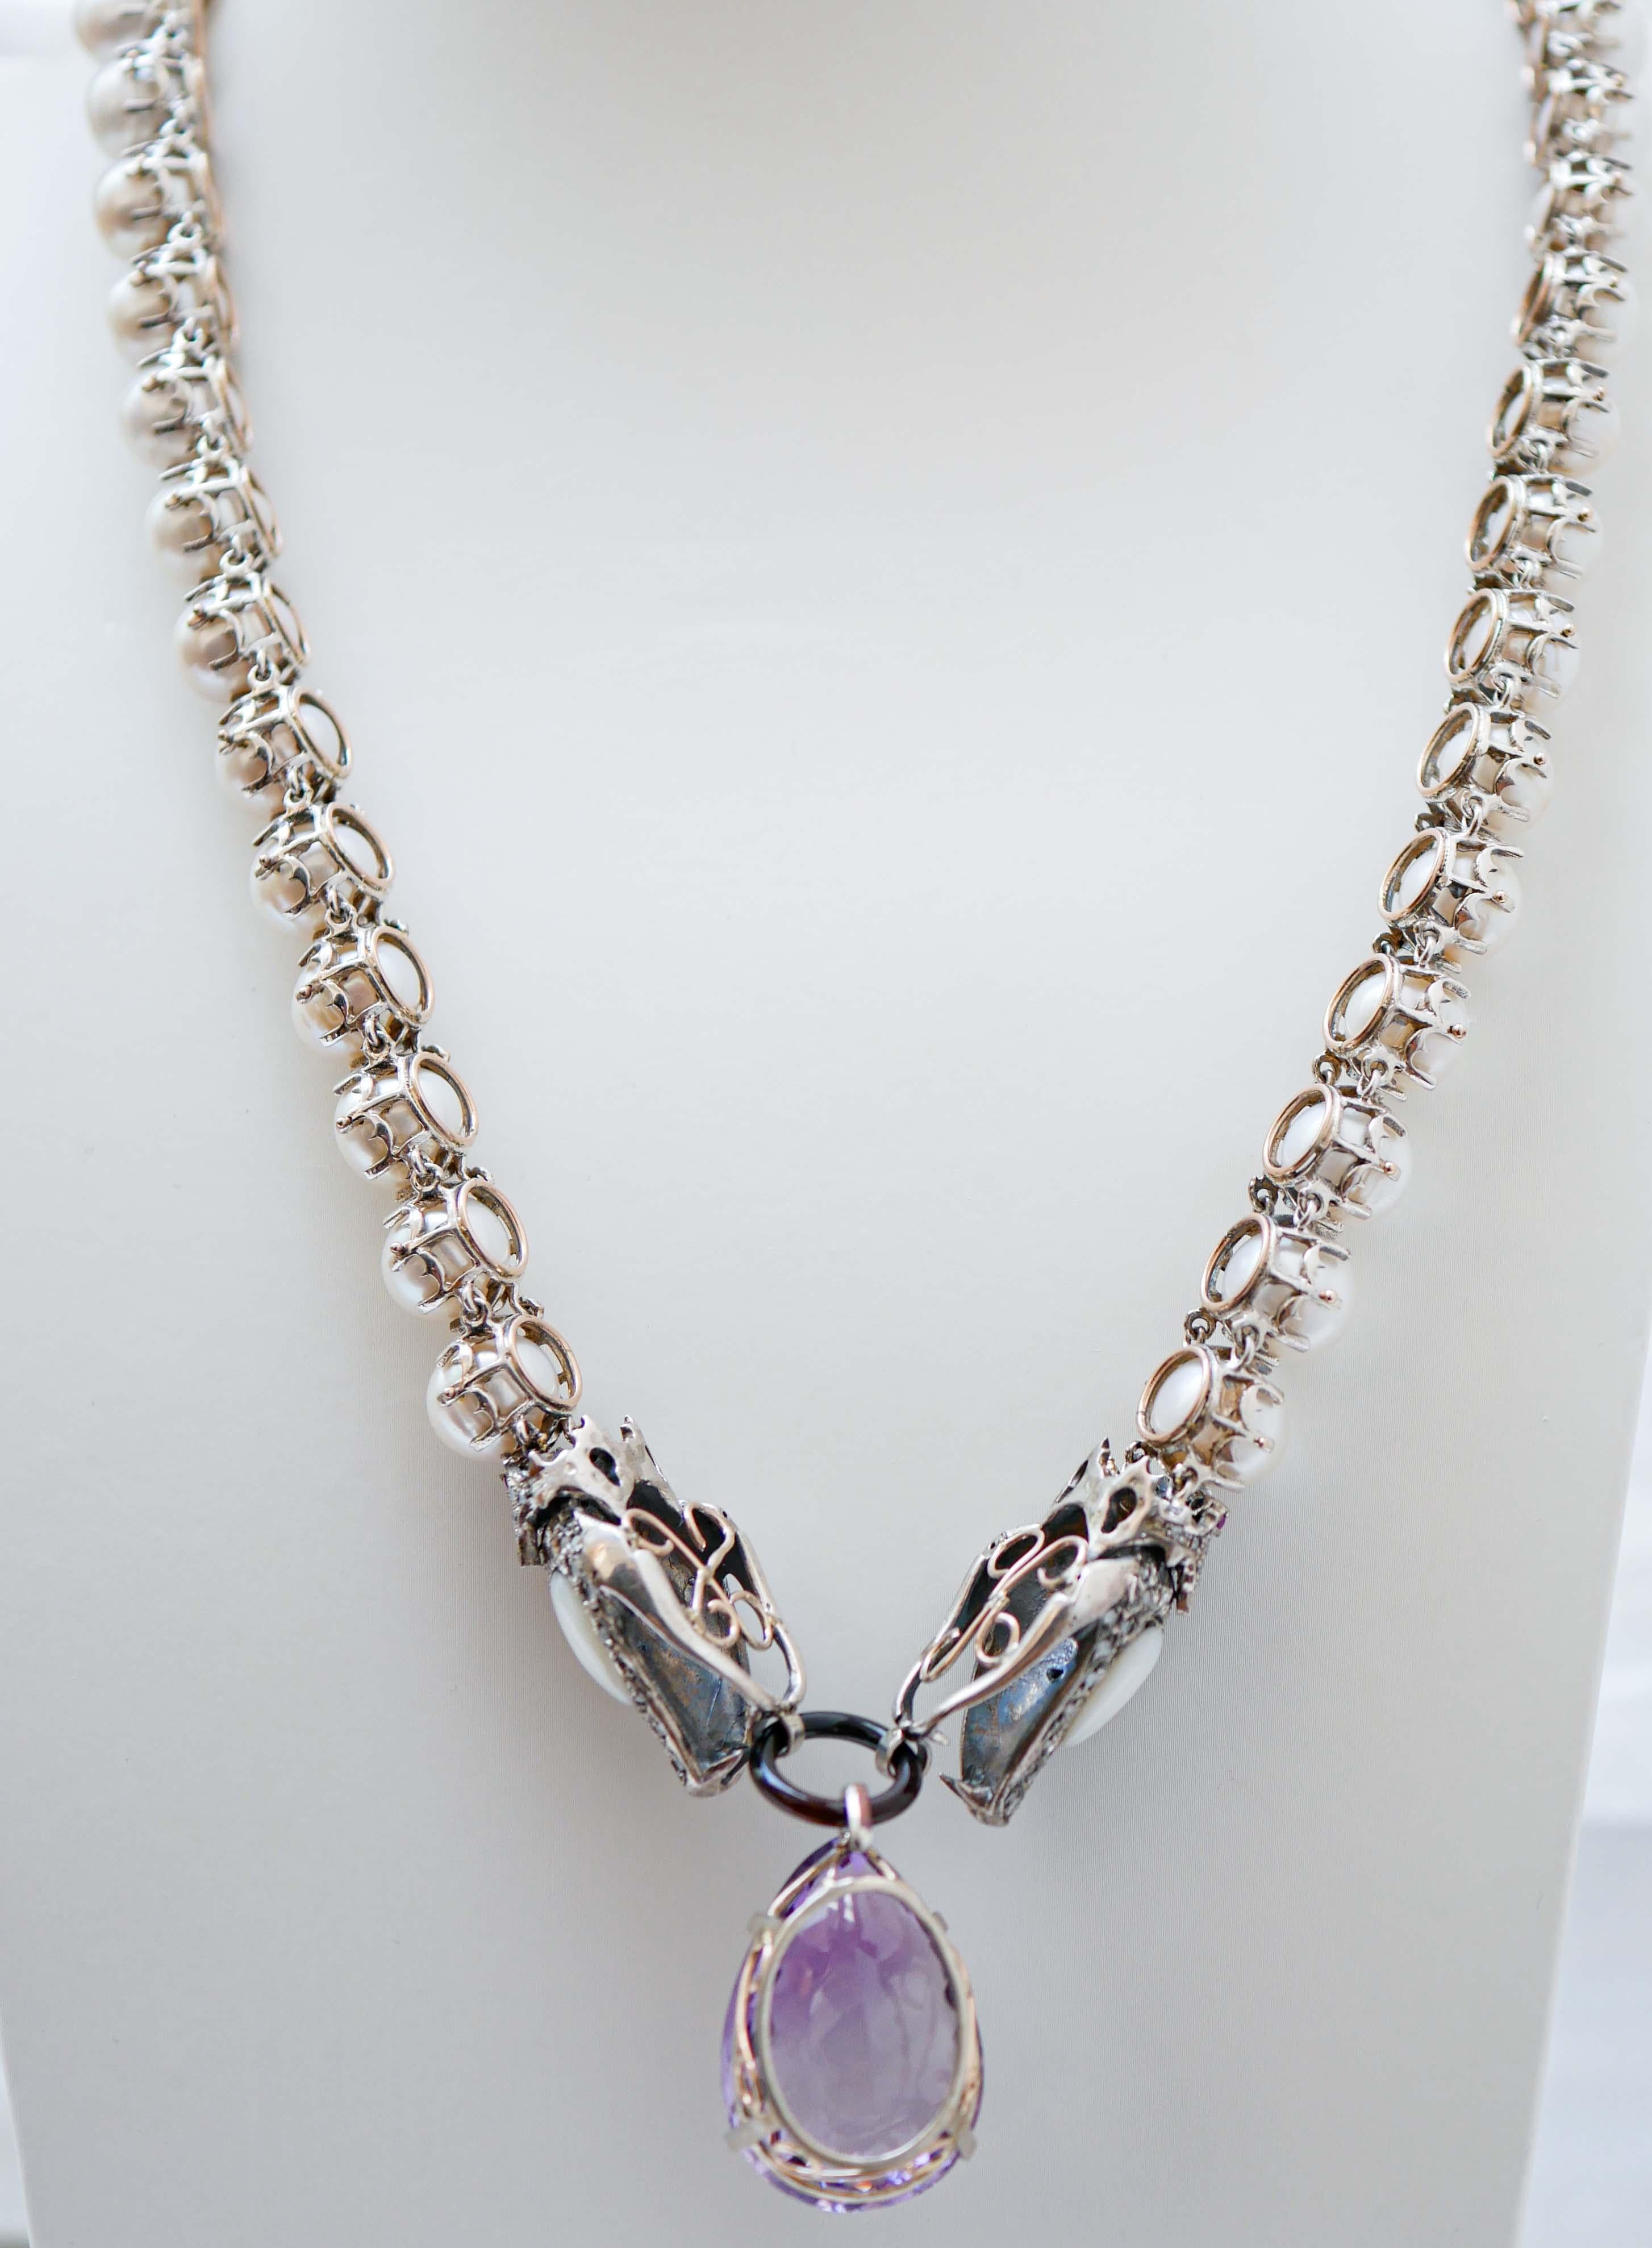 Retro Amethyst, Rubies, Pearls, White Stones, Diamonds, Rose Gold and Silver Necklace. For Sale